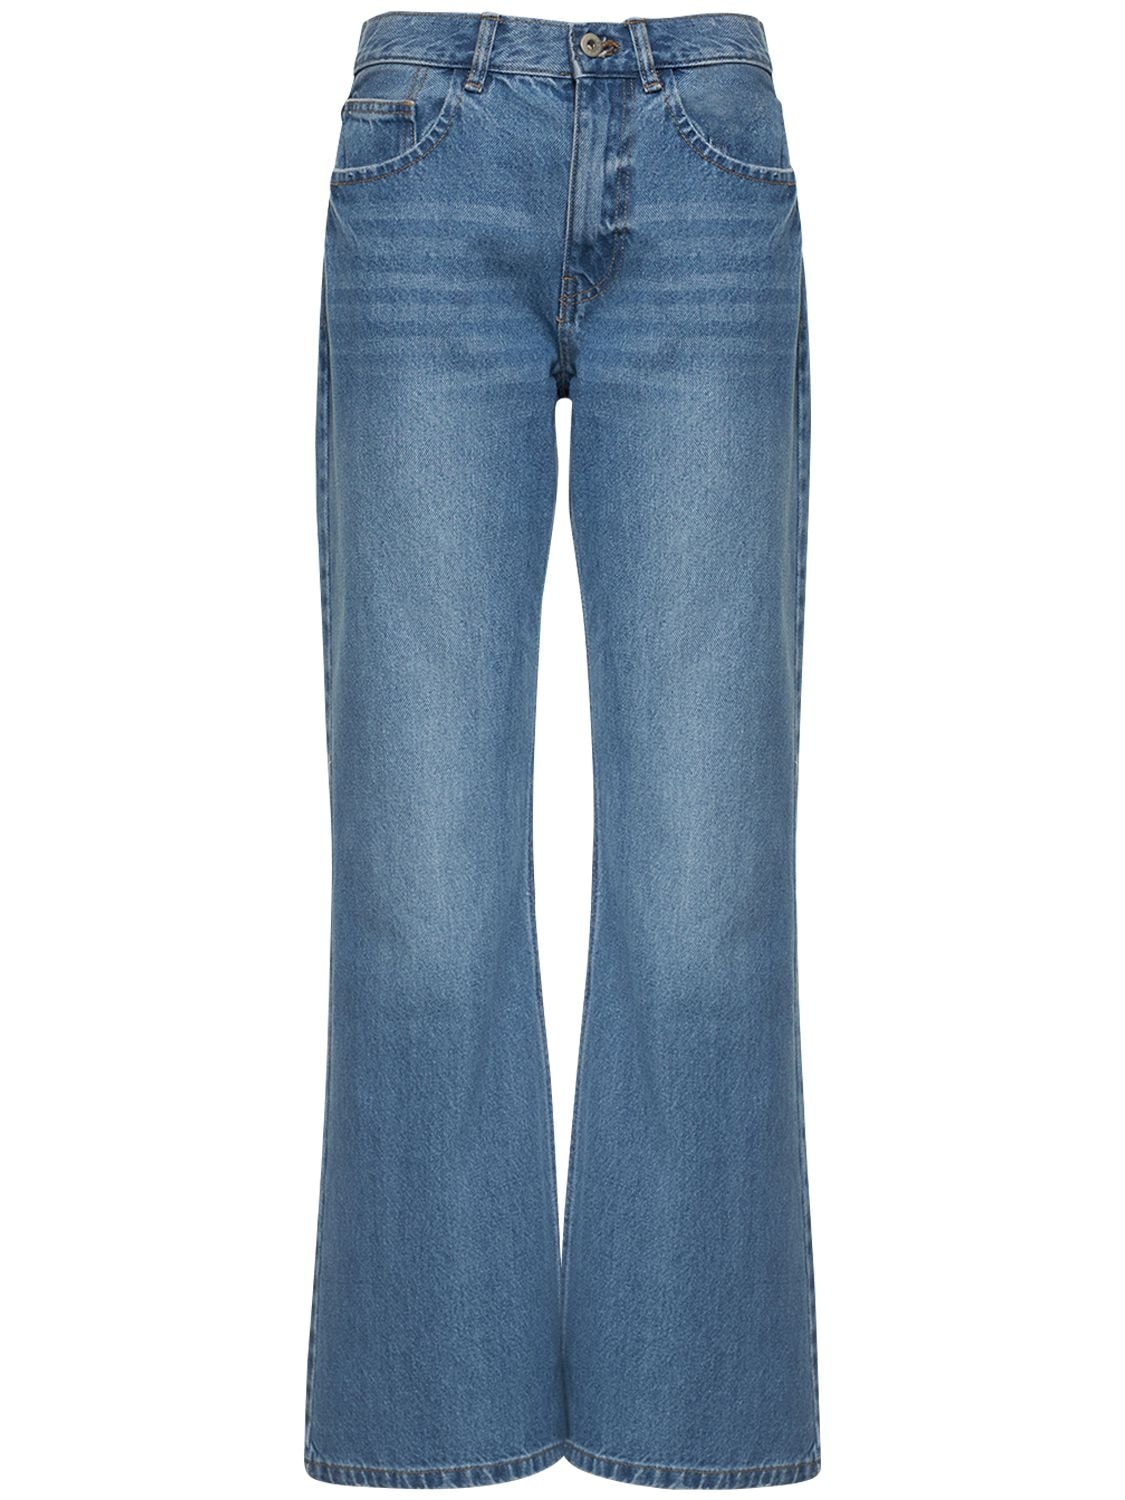 GIMAGUAS High Rise Flared Jeans